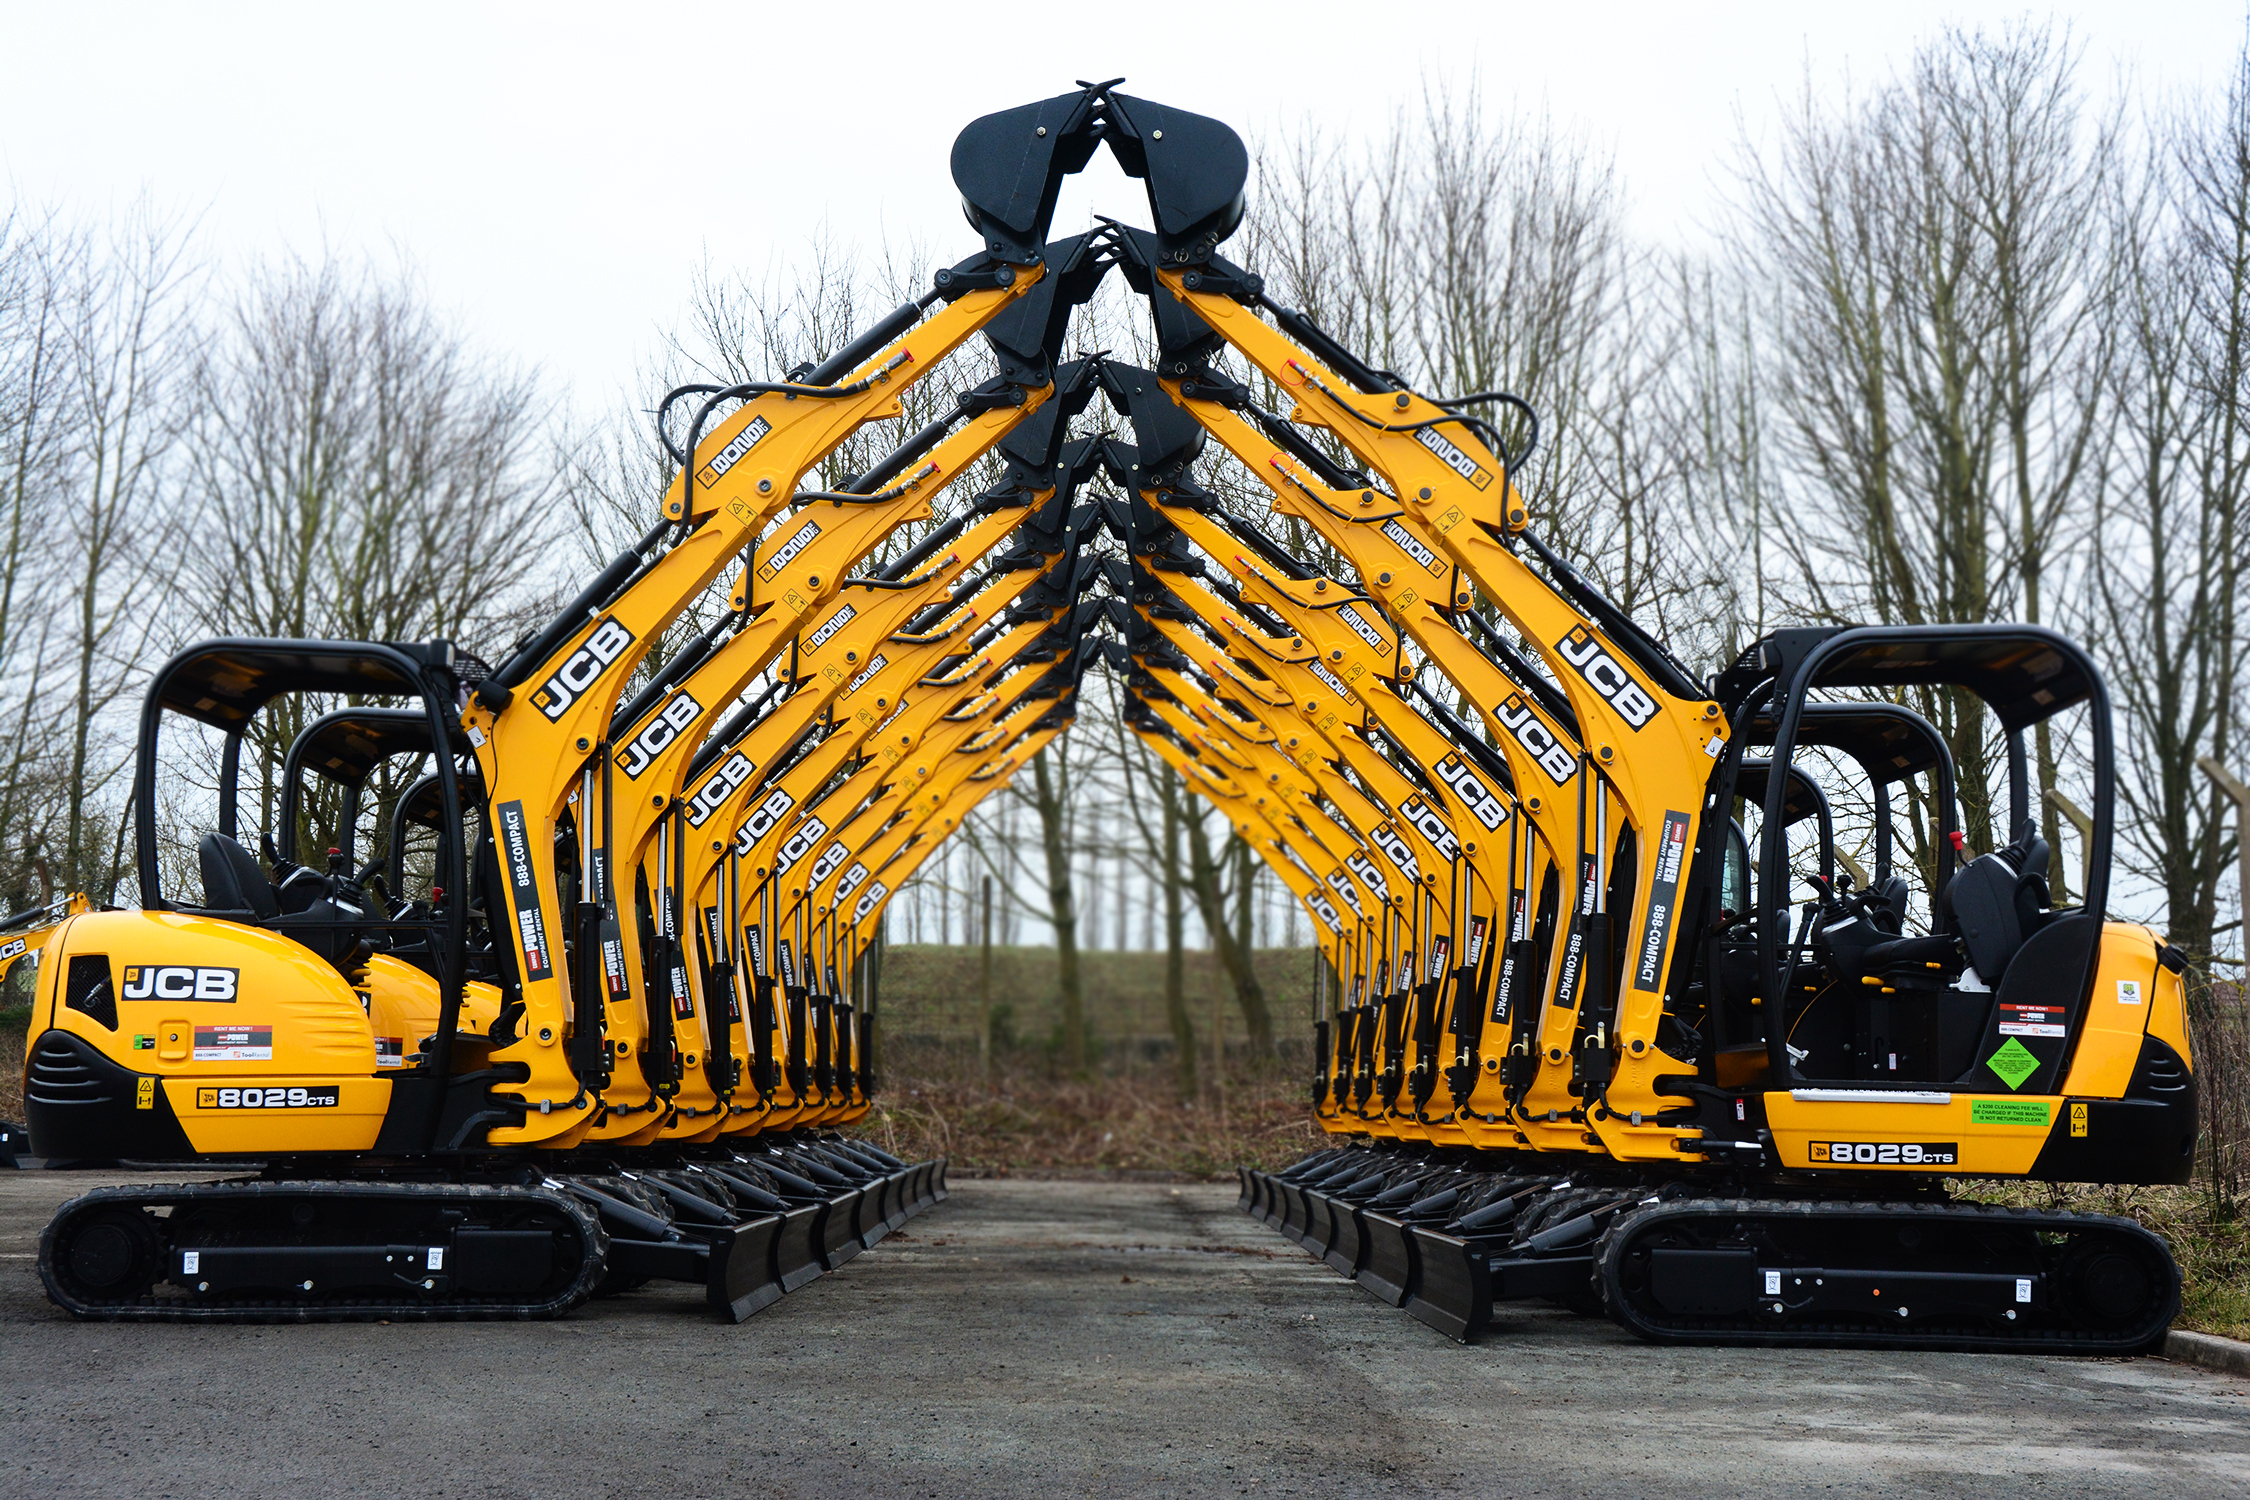 JCB's factories produced more than 64,000 machines in 2014, and the company achieved sales of $3.9 billion.